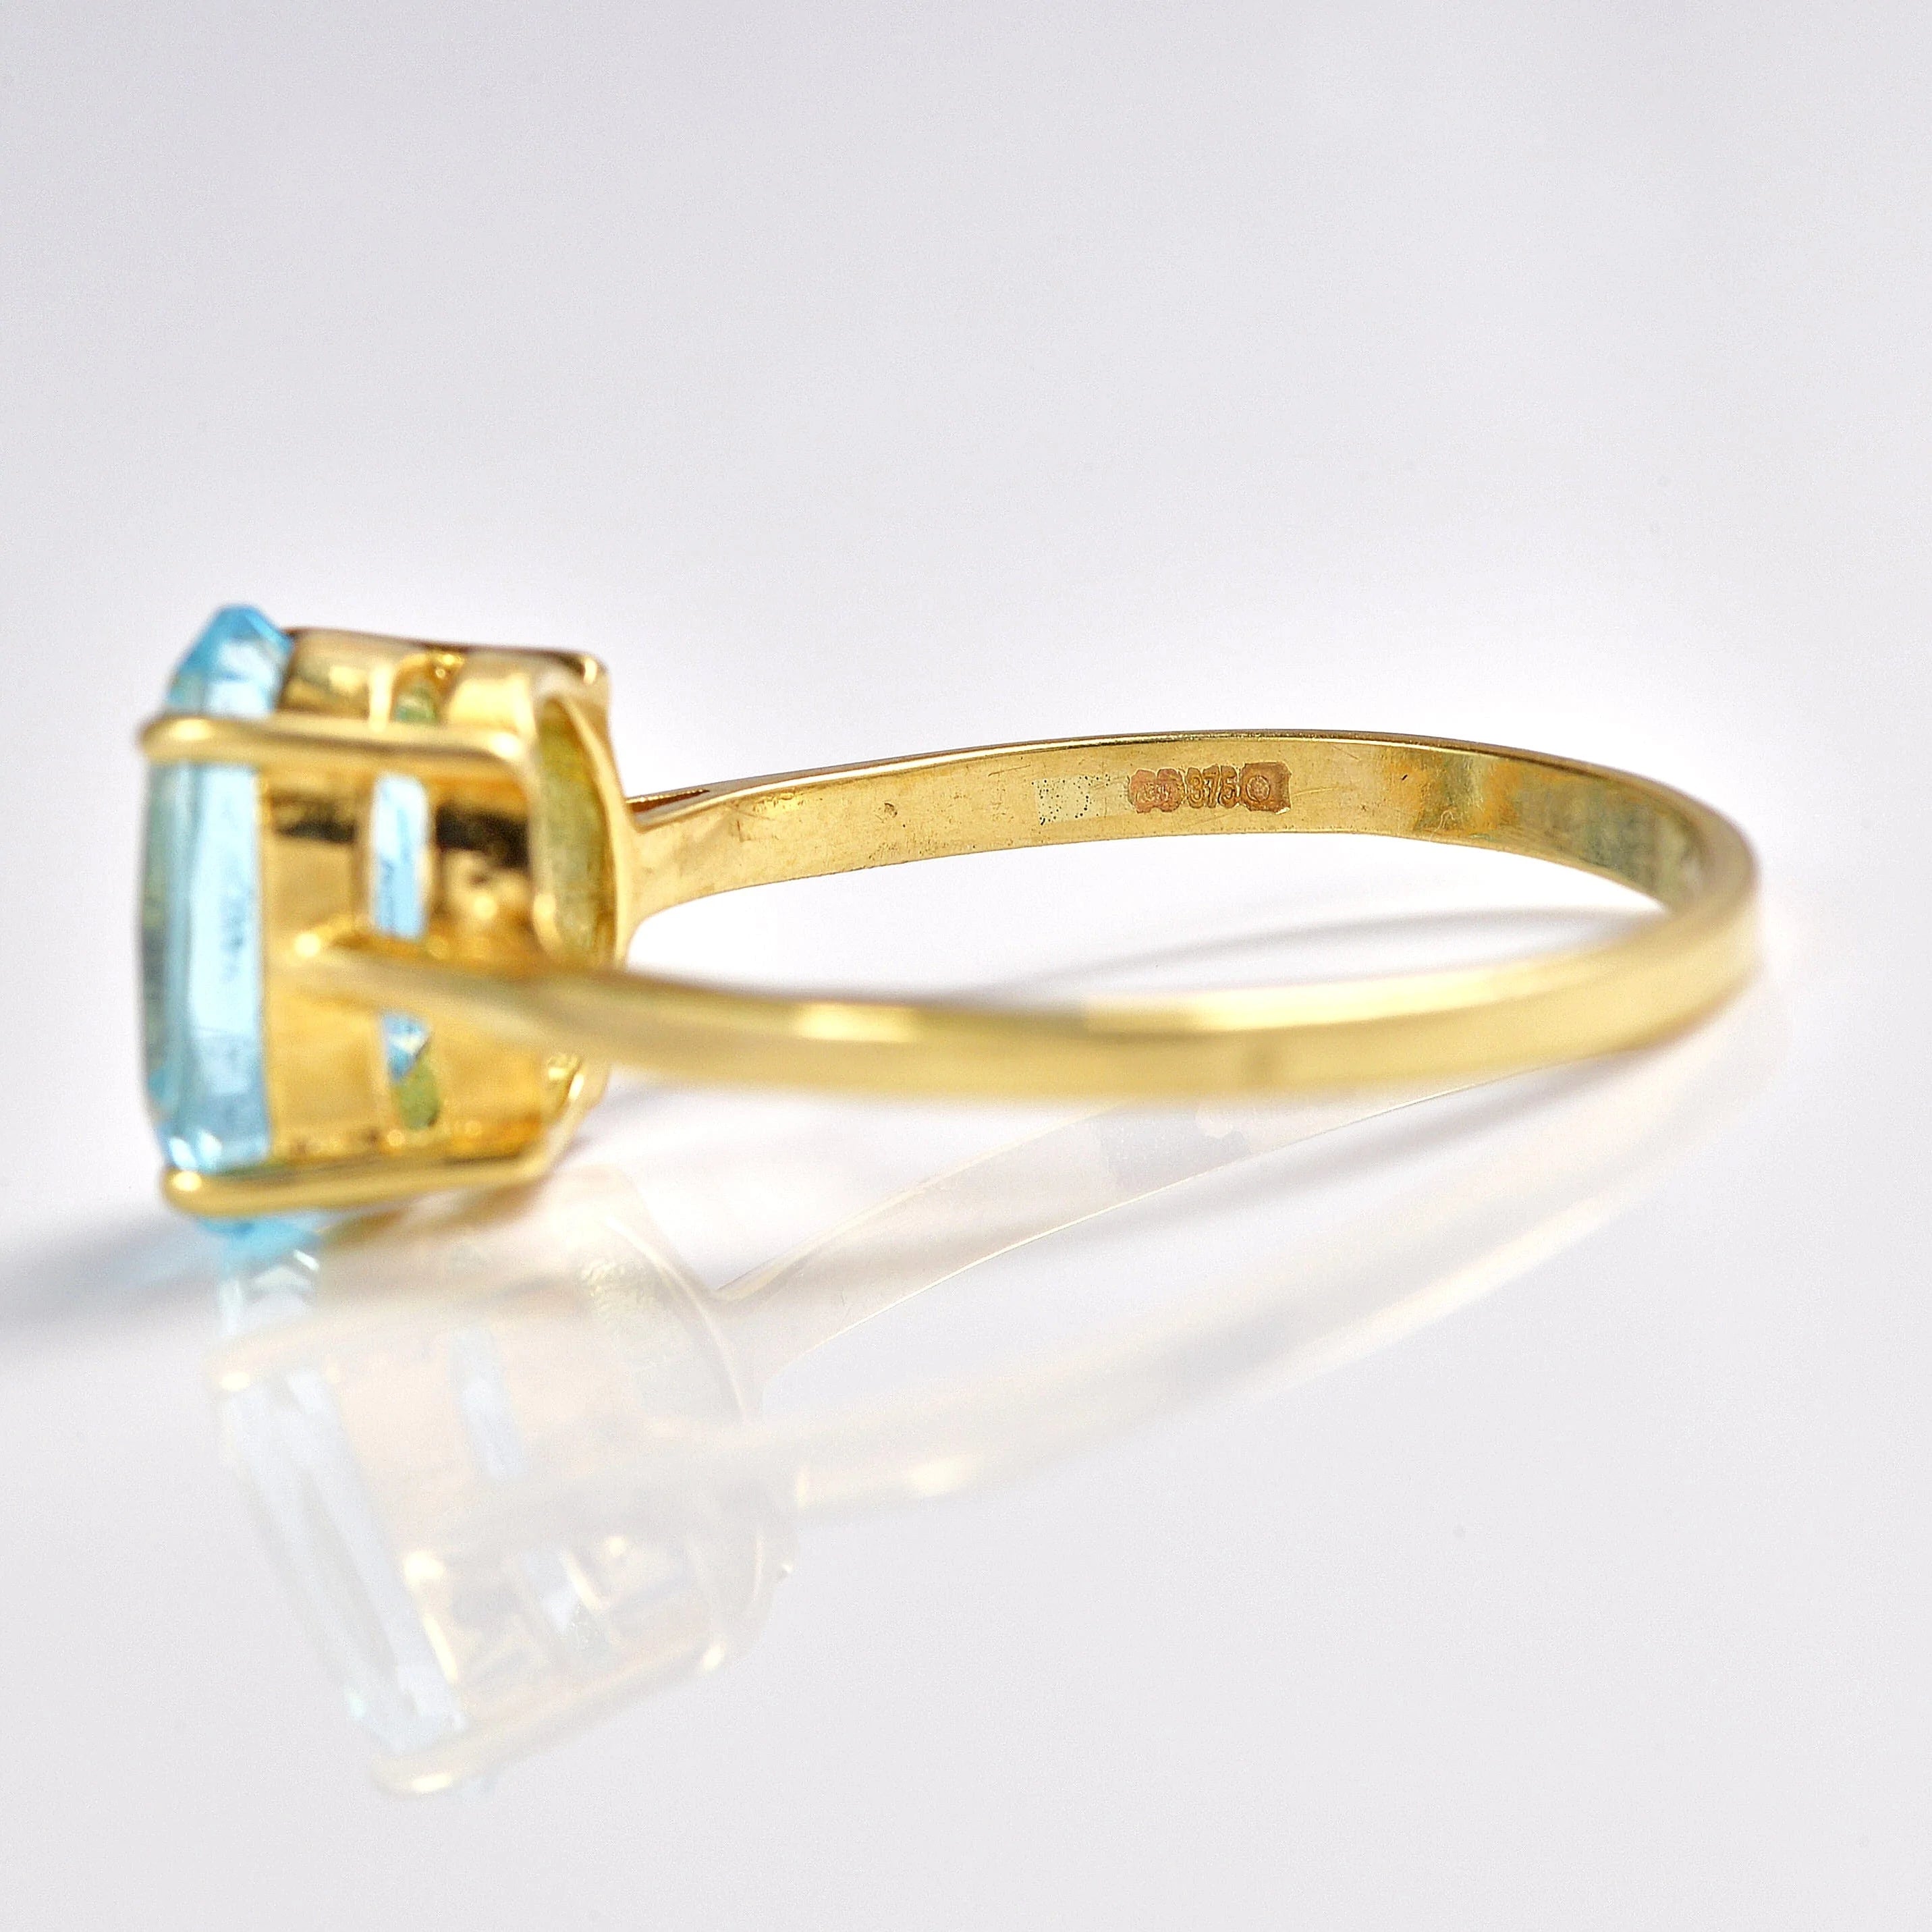 Ellibelle Jewellery Vintage Blue Topaz 9ct Yellow Gold Solitaire Ring